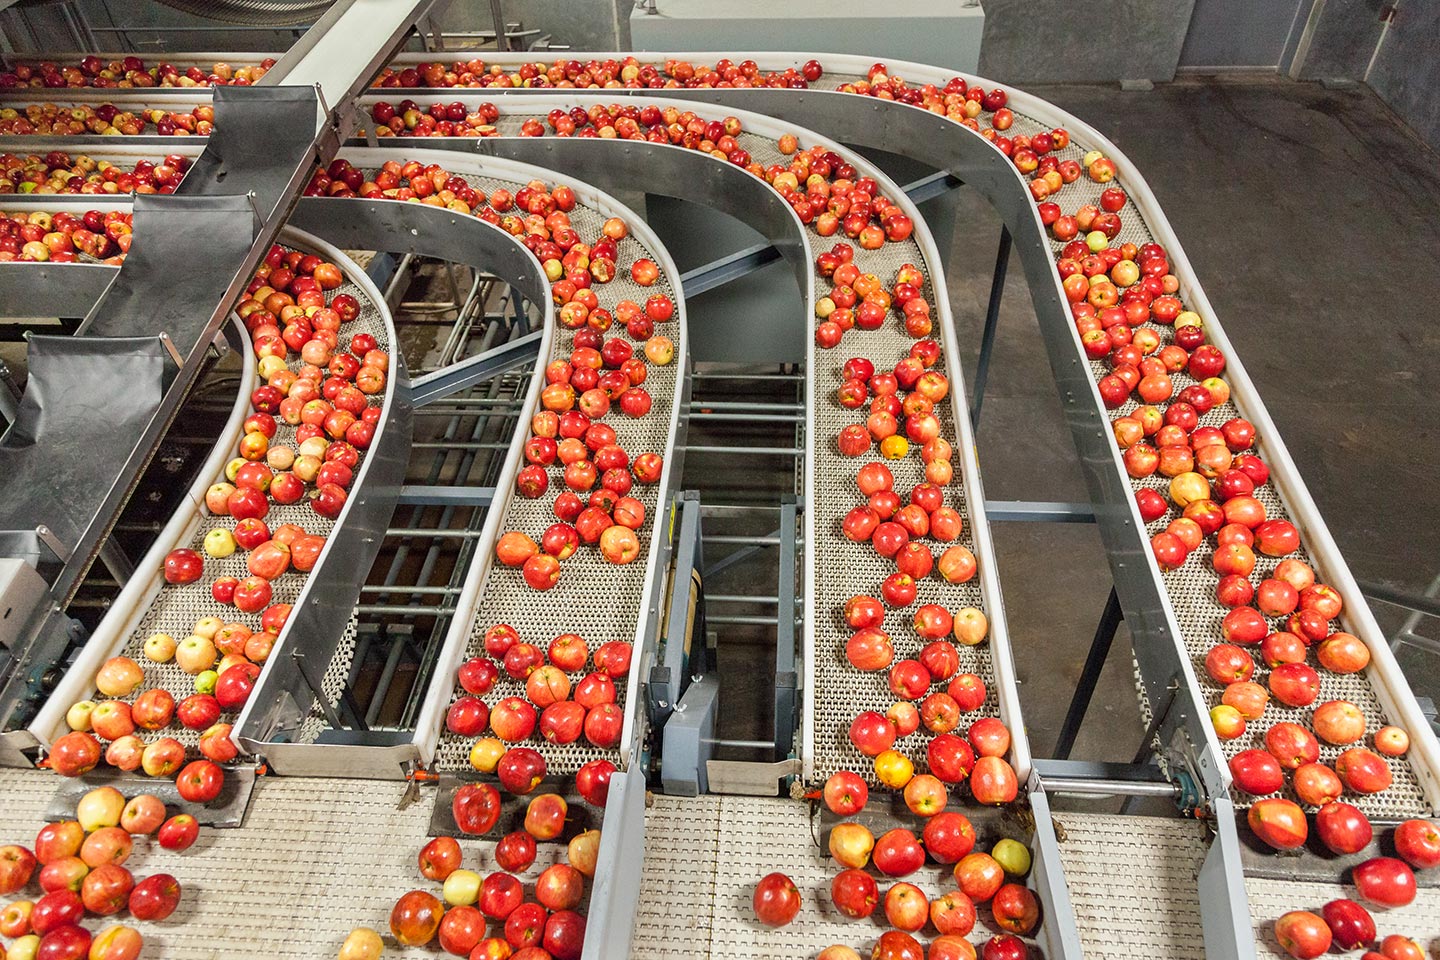 Apples on conveyor belts in an IoT-based food quality monitoring system.